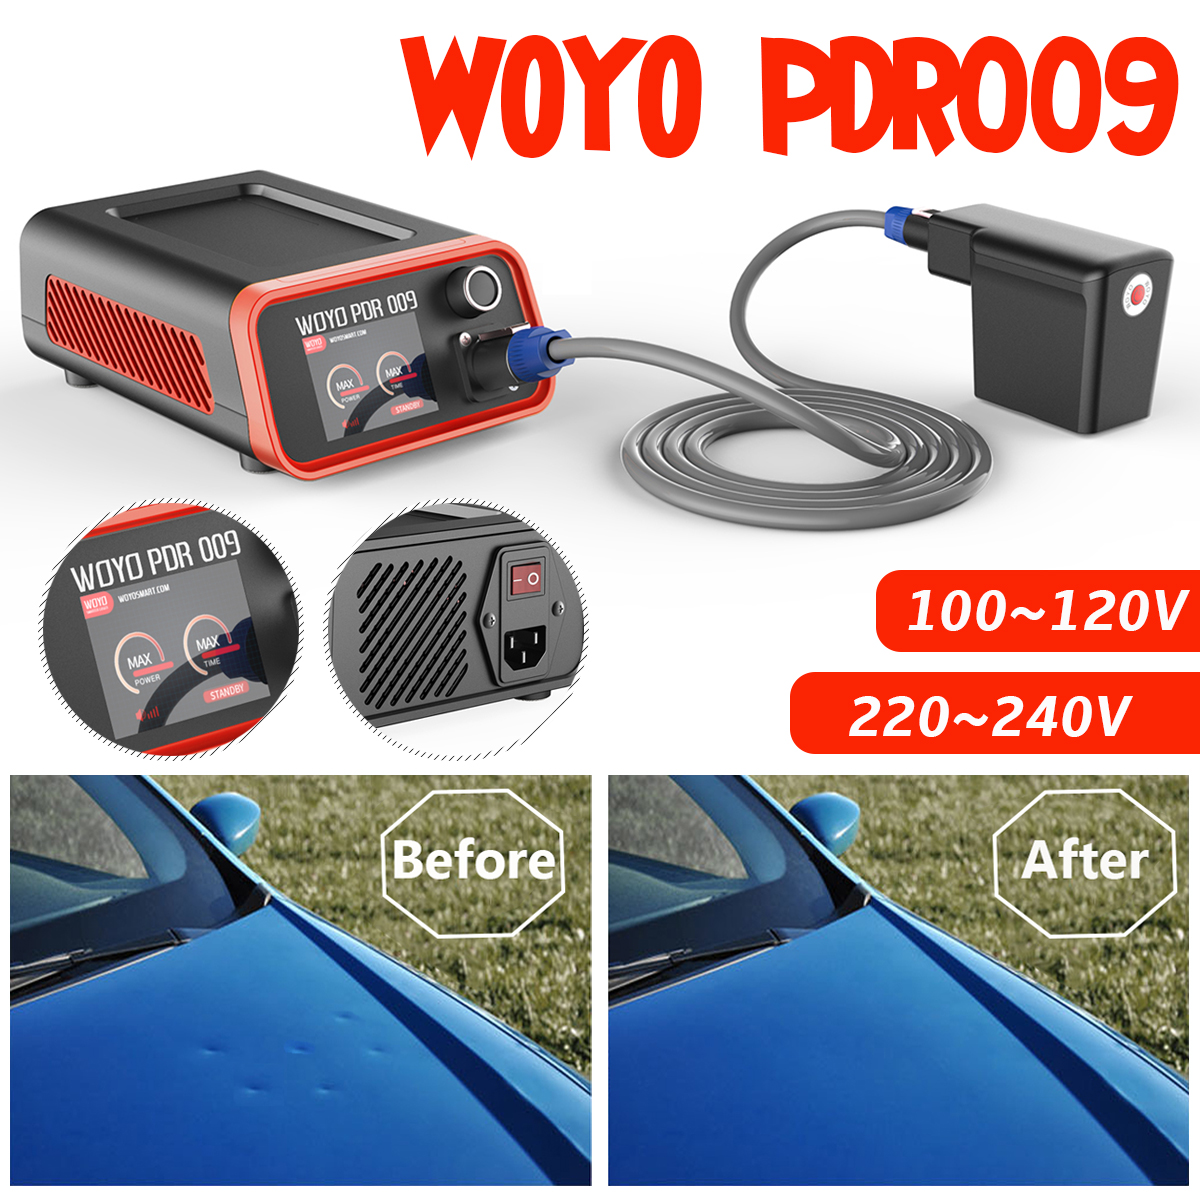 WOYO-PDR009-1500W-Induction-Heater-Paintless-Dent-Metal-Repair-Removing-Tool-1449386